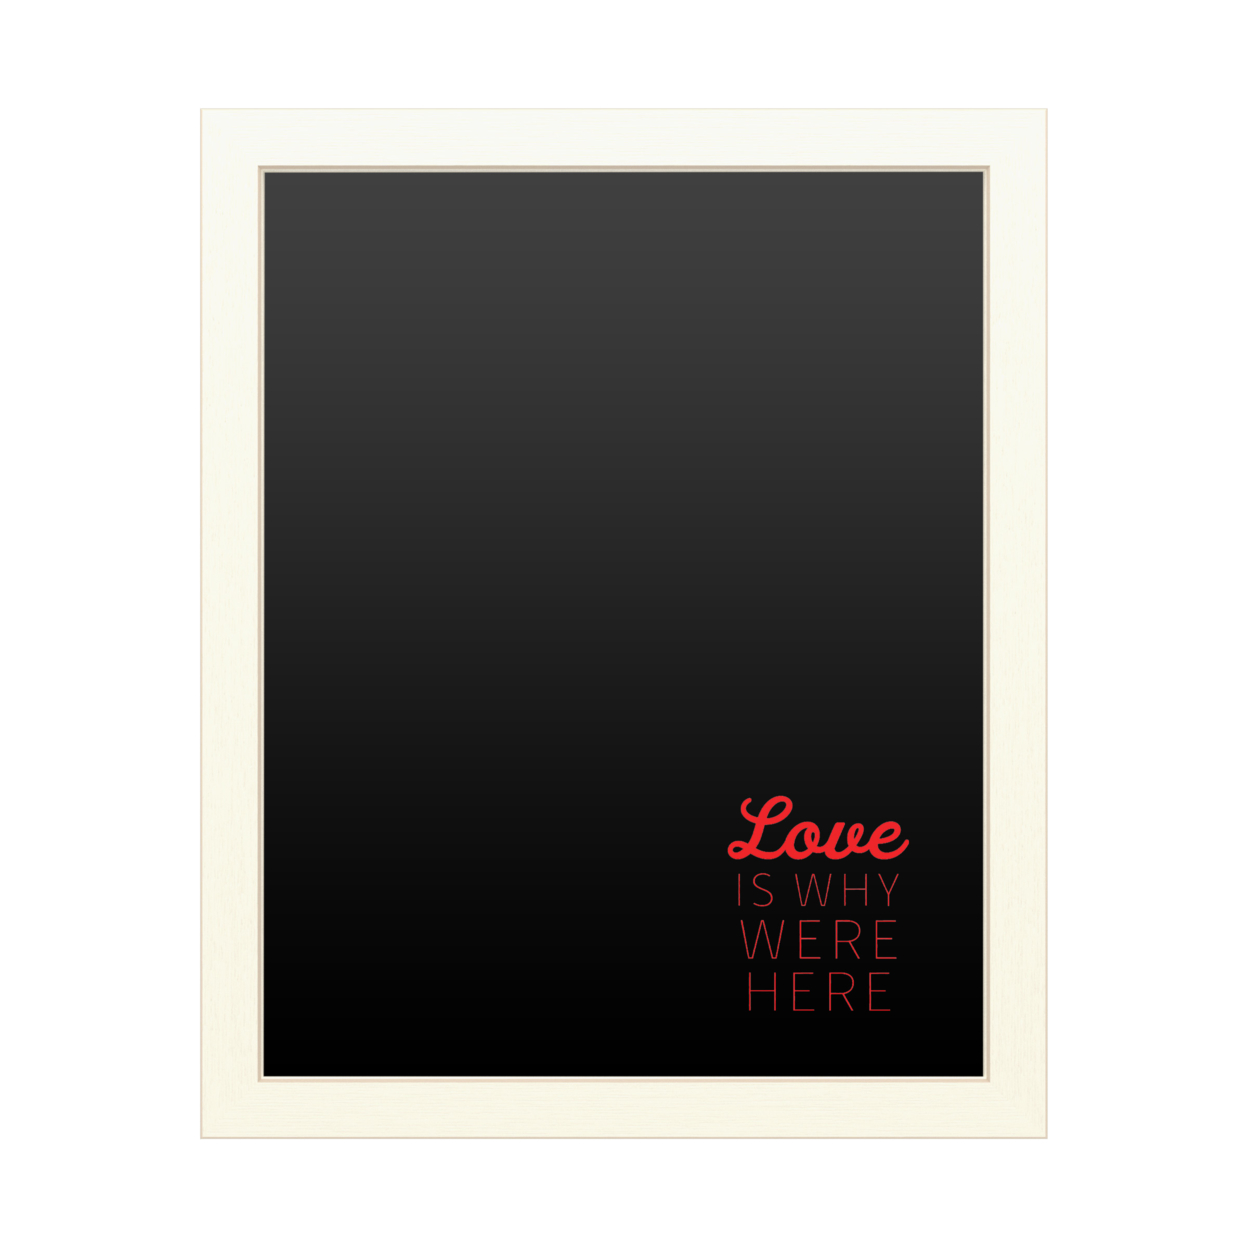 16 X 20 Chalk Board With Printed Artwork - Love Is Why Were Here 2 White Board - Ready To Hang Chalkboard